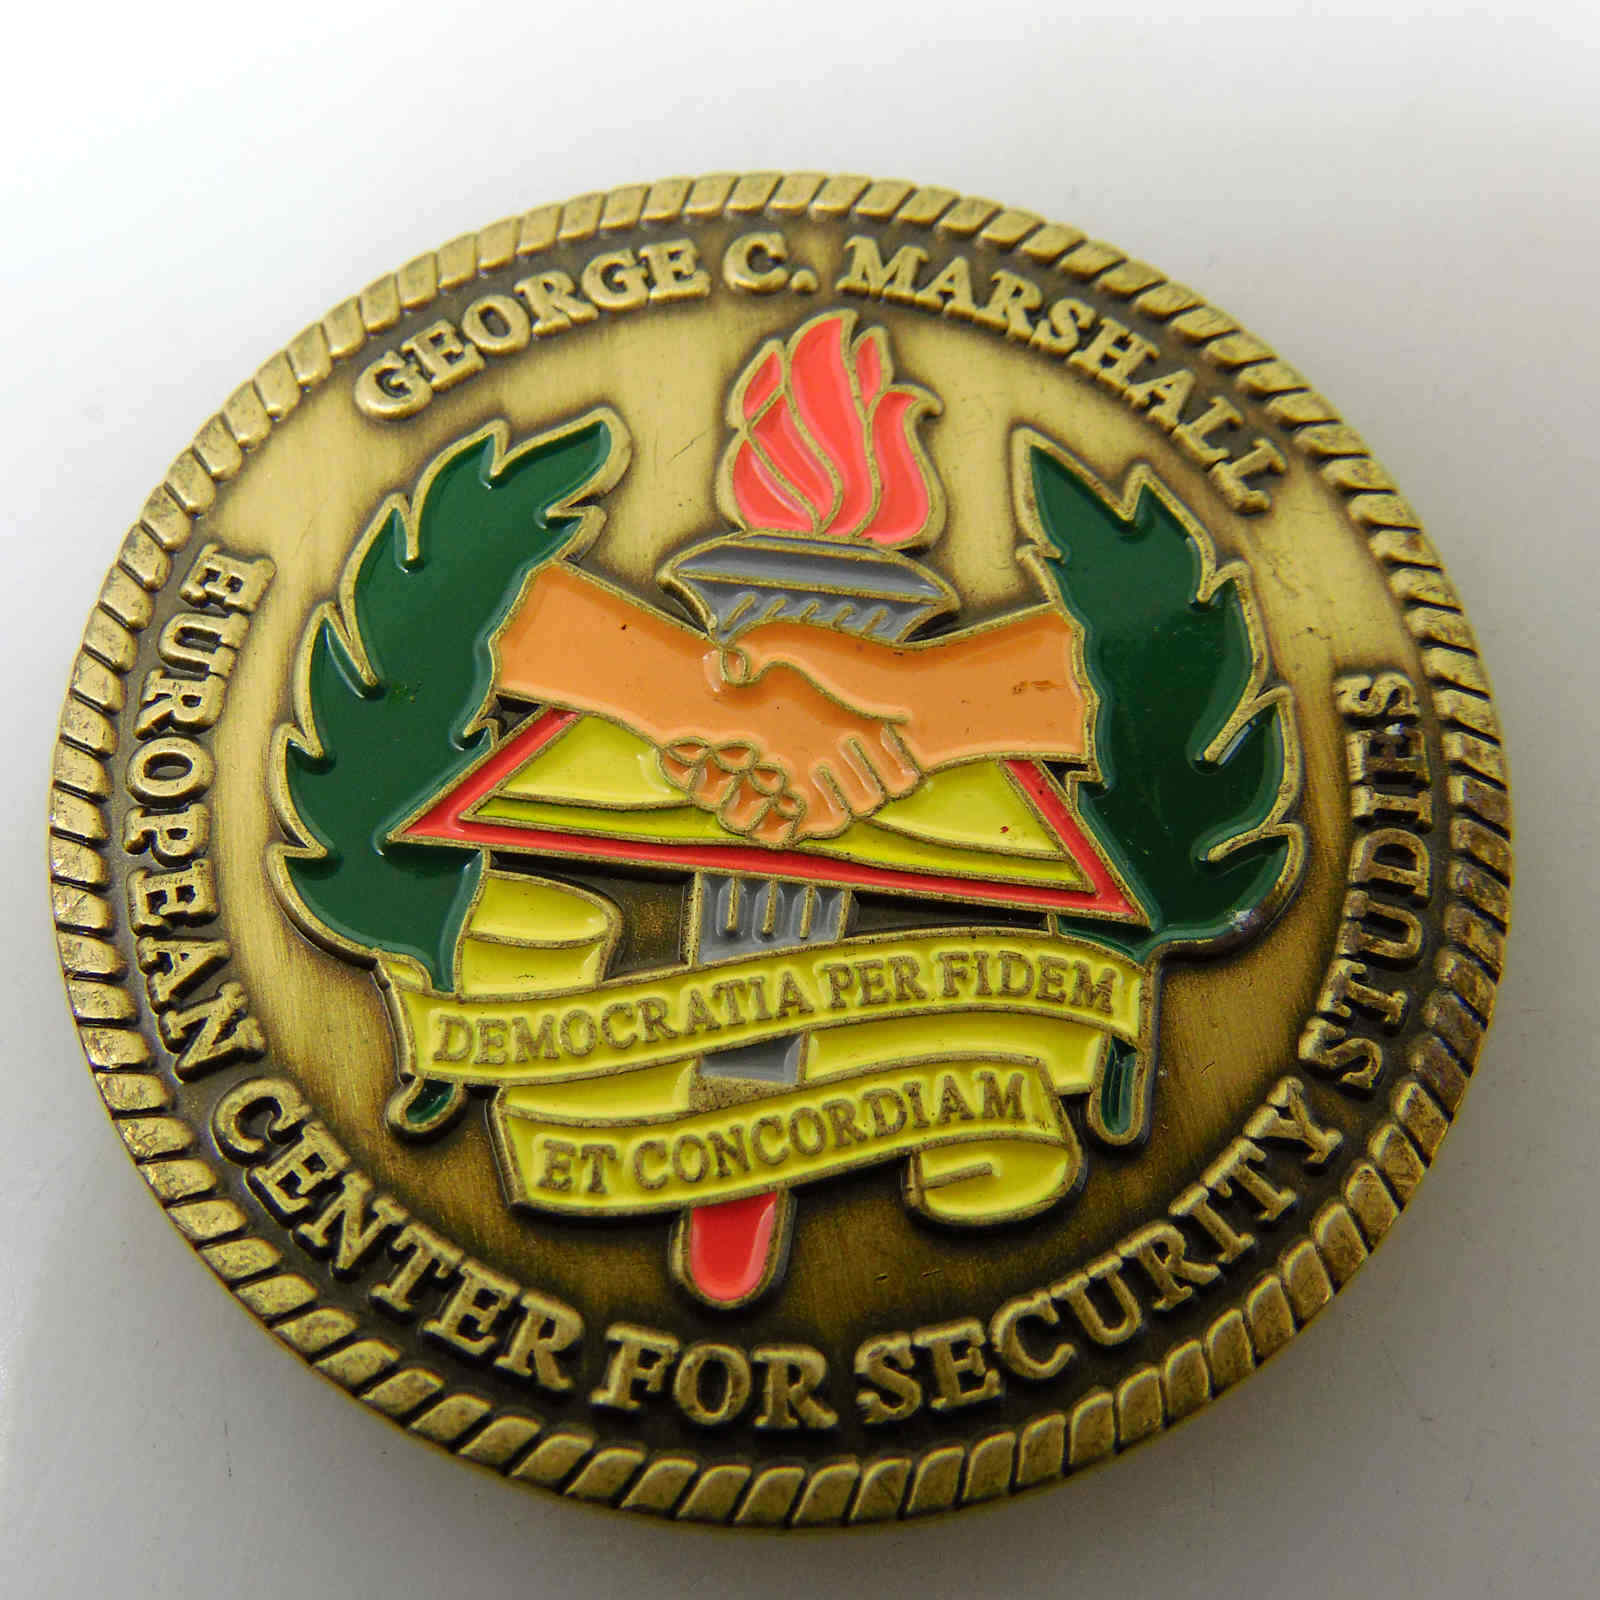 EUROPEAN CENTER FOR SECURITY STUDIES CHALLENGE COIN